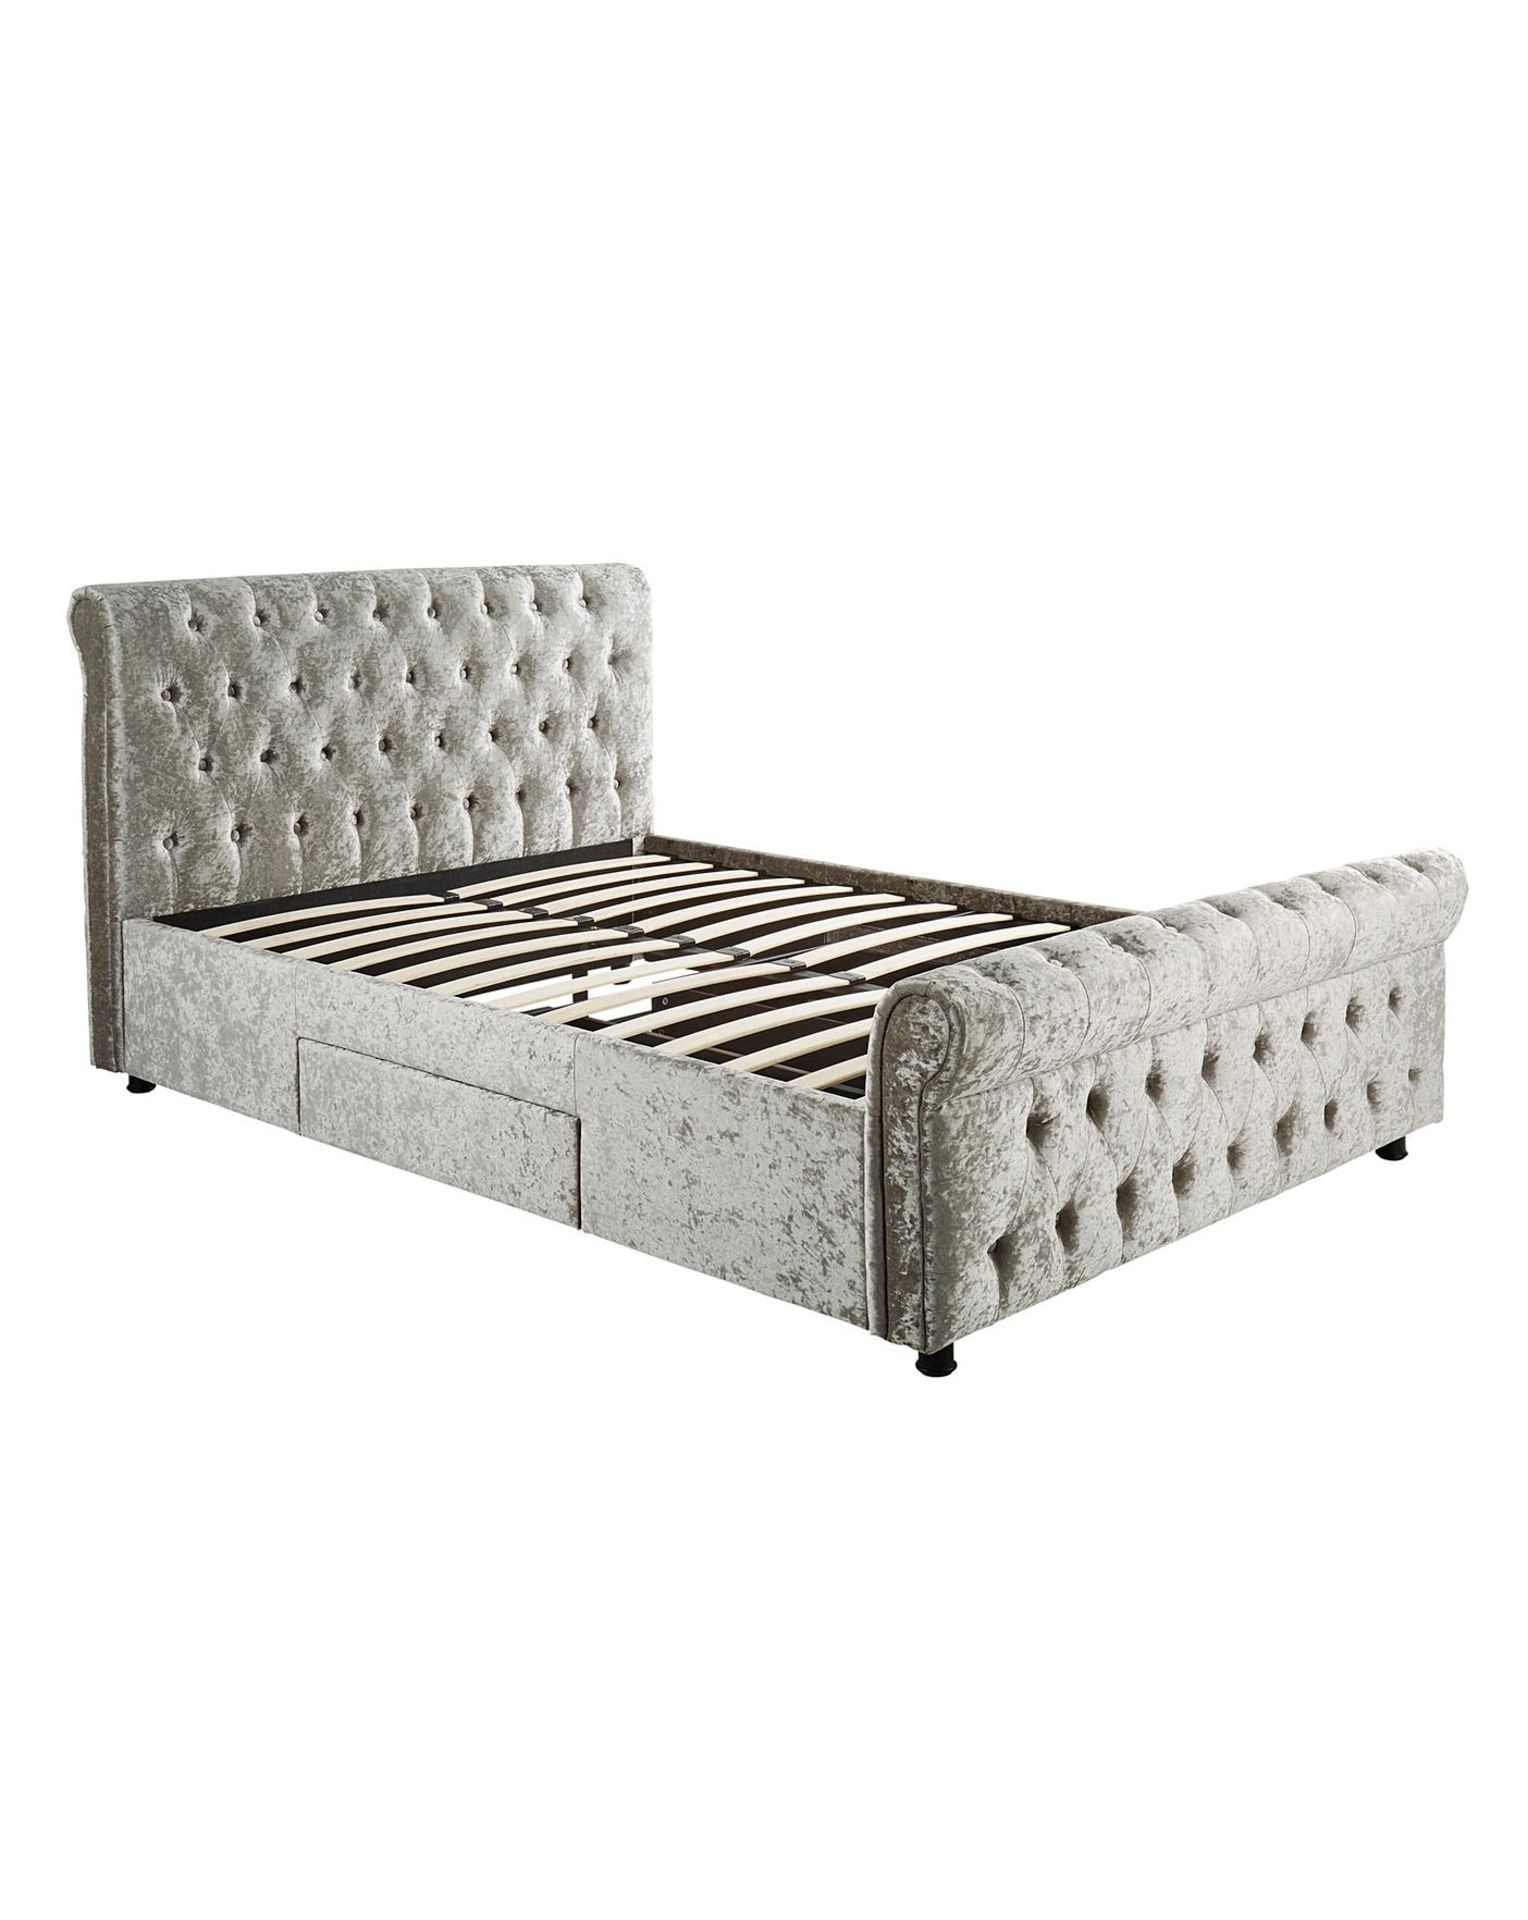 NEW & BOXED KINGSTON Crushed Velvet Bed Frame with 2 Storage Drawers - SILVER. RRP £549. The - Image 2 of 3